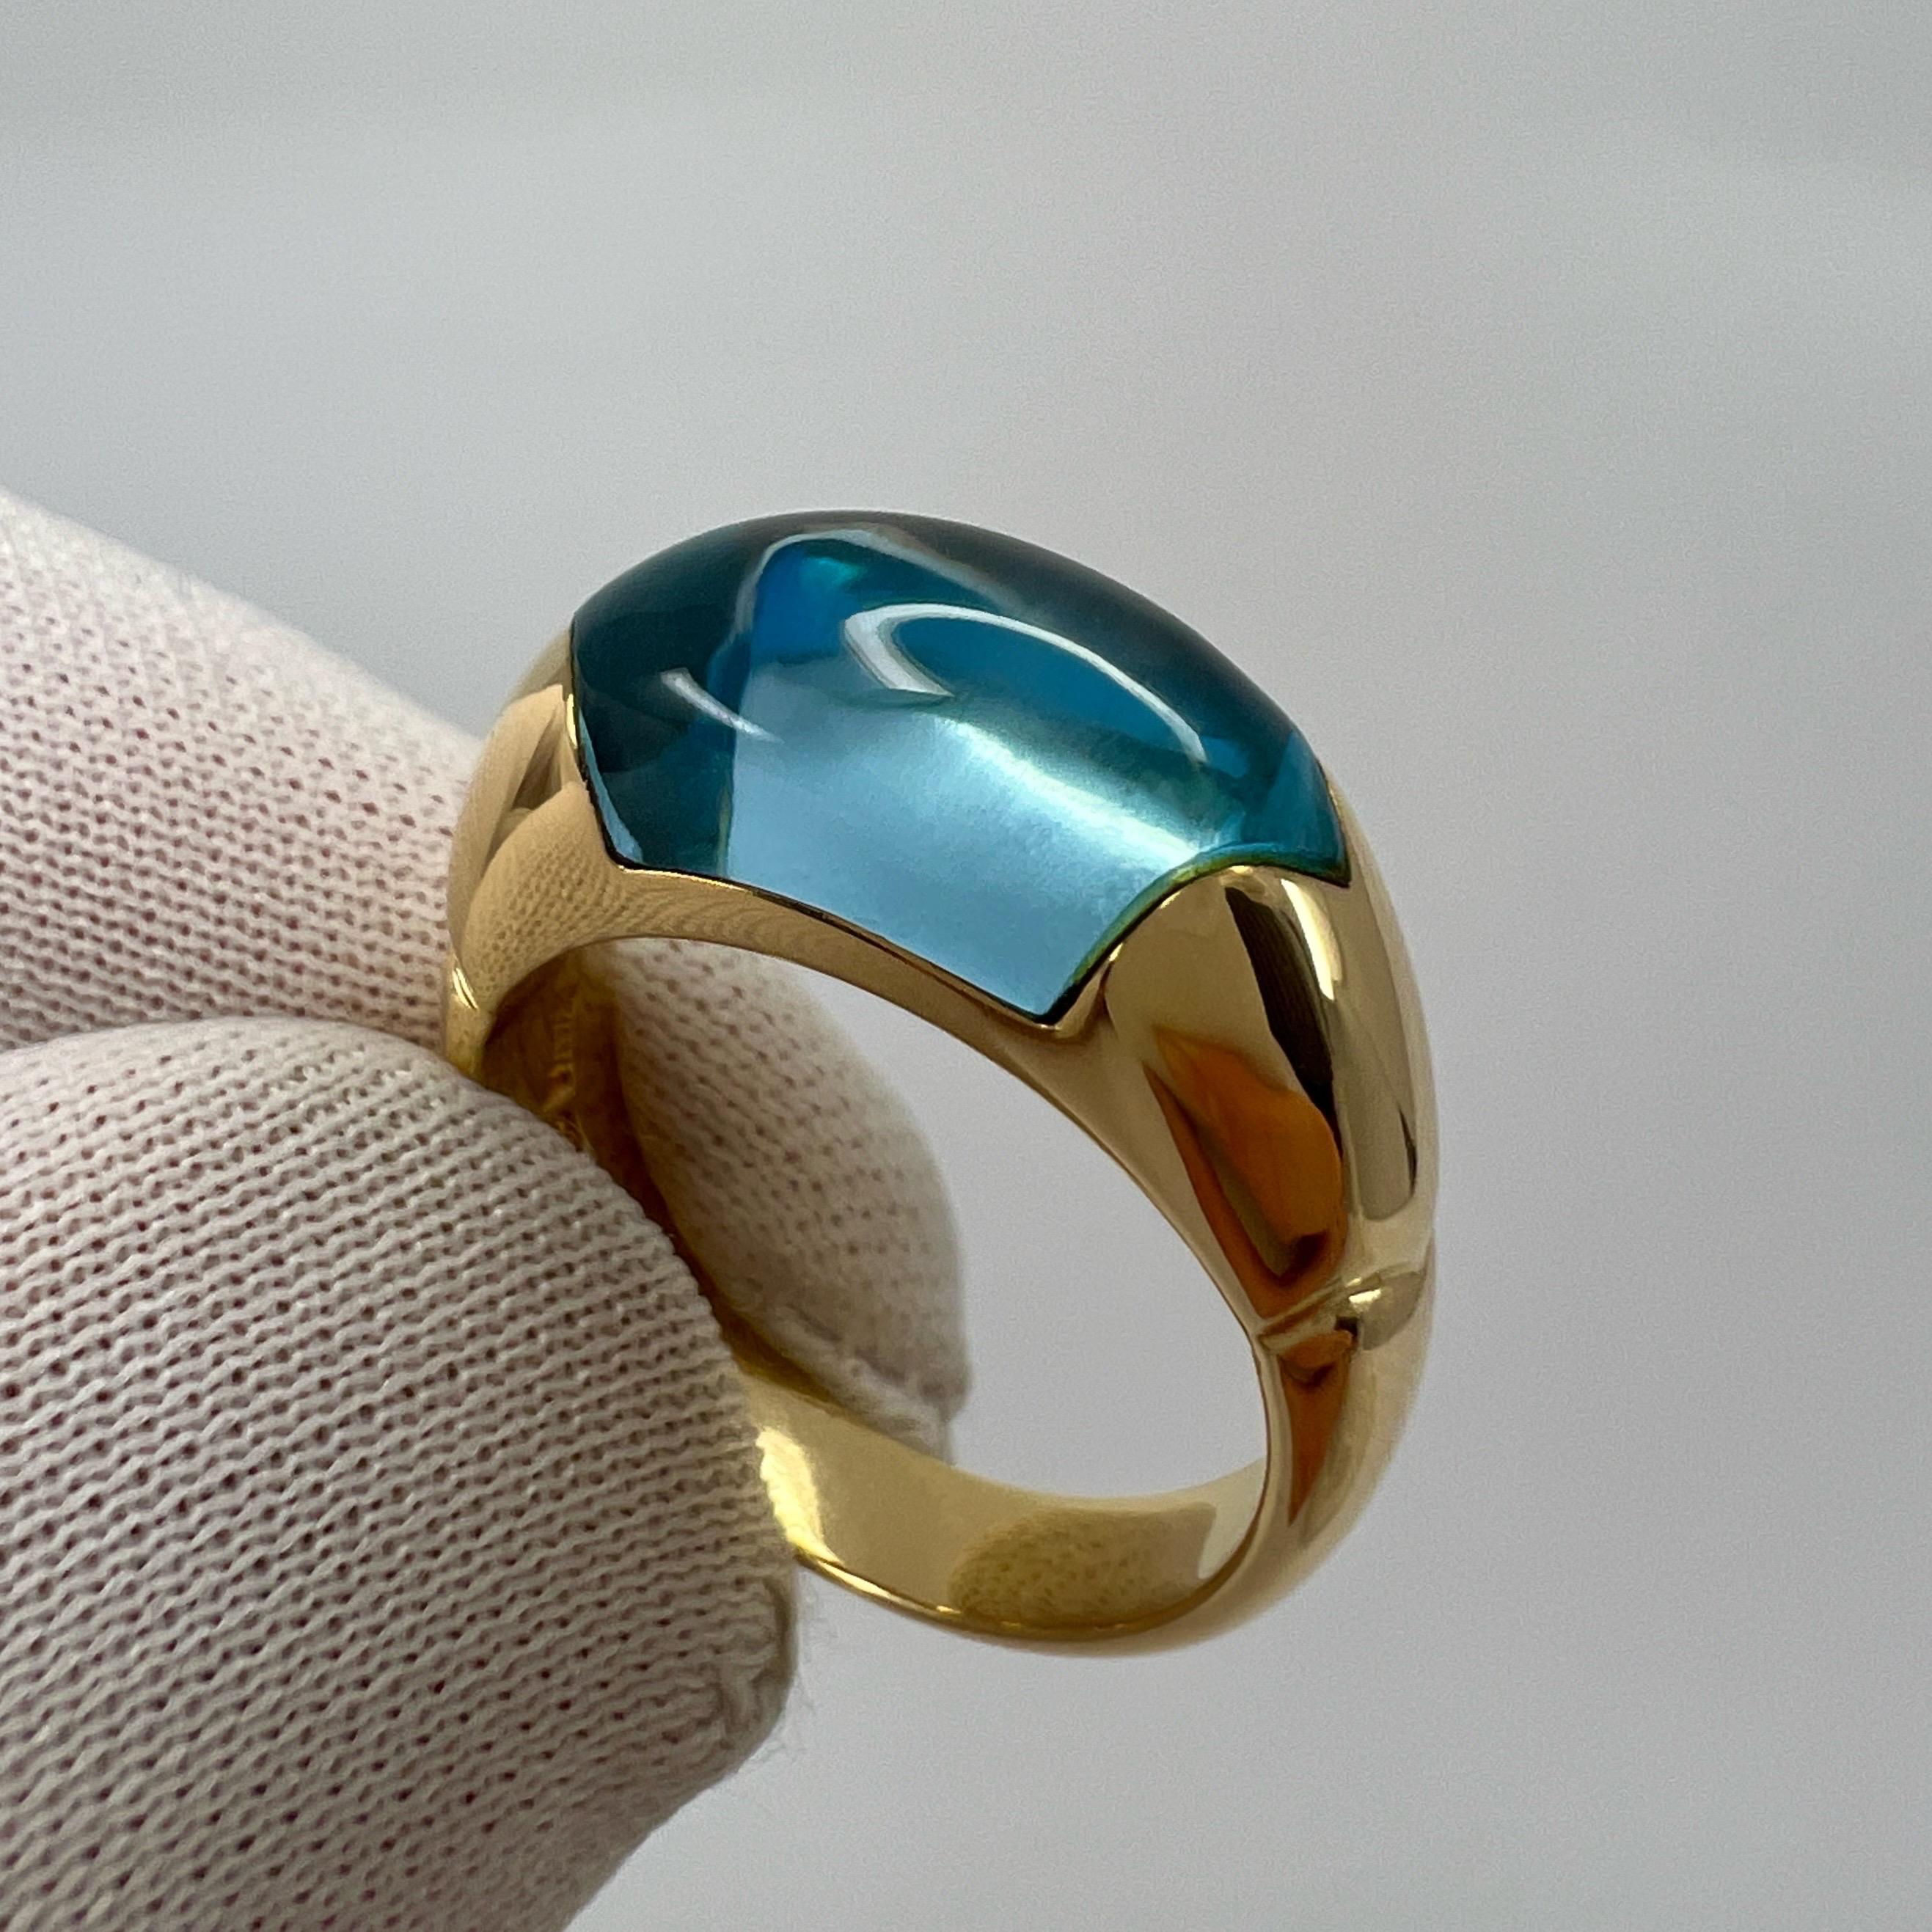 Women's or Men's Rare Vintage Bvlgari Certica 18k Yellow Gold Blue Topaz Dome Ring with Box